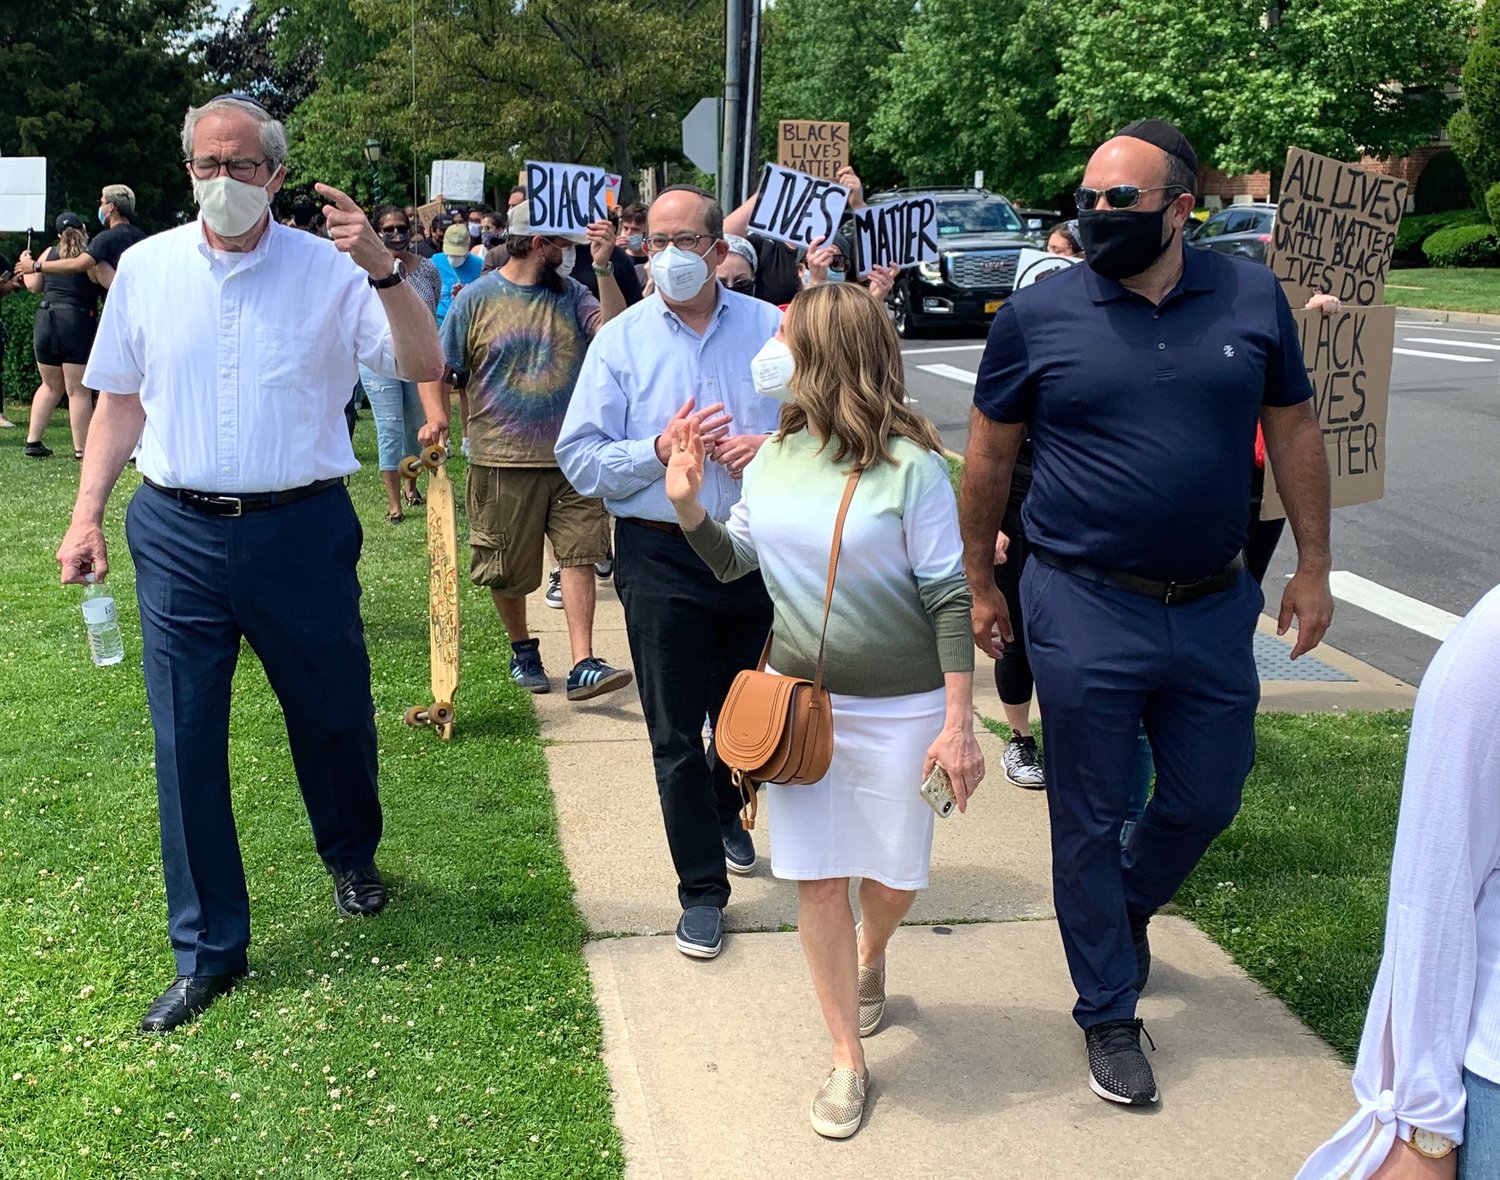 Marching at Andrew Parise Park in Cendarhurst on Sunday, Rabbi Kenneth Hain of Congregation Beth Sholom in Lawrence (left) and Lawrence Deputy Mayor Michael Fragin (right).